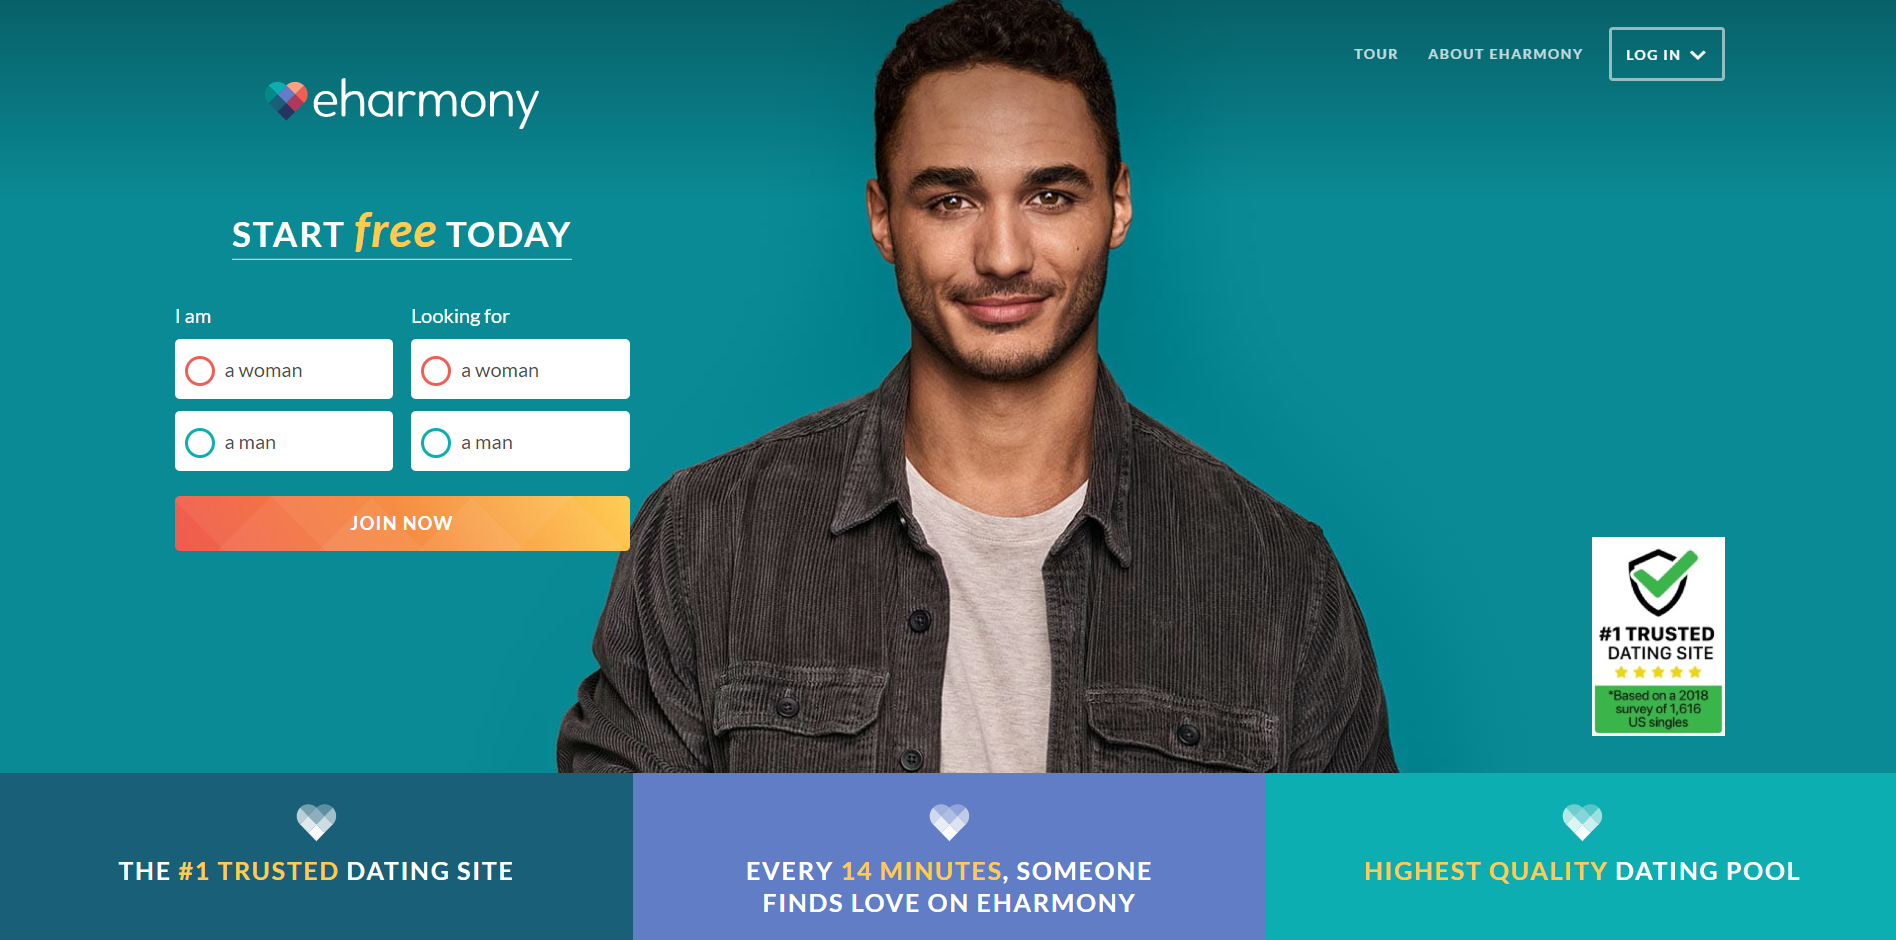 eHarmony Review: We Tested eHarmony.com to See How Well it Works